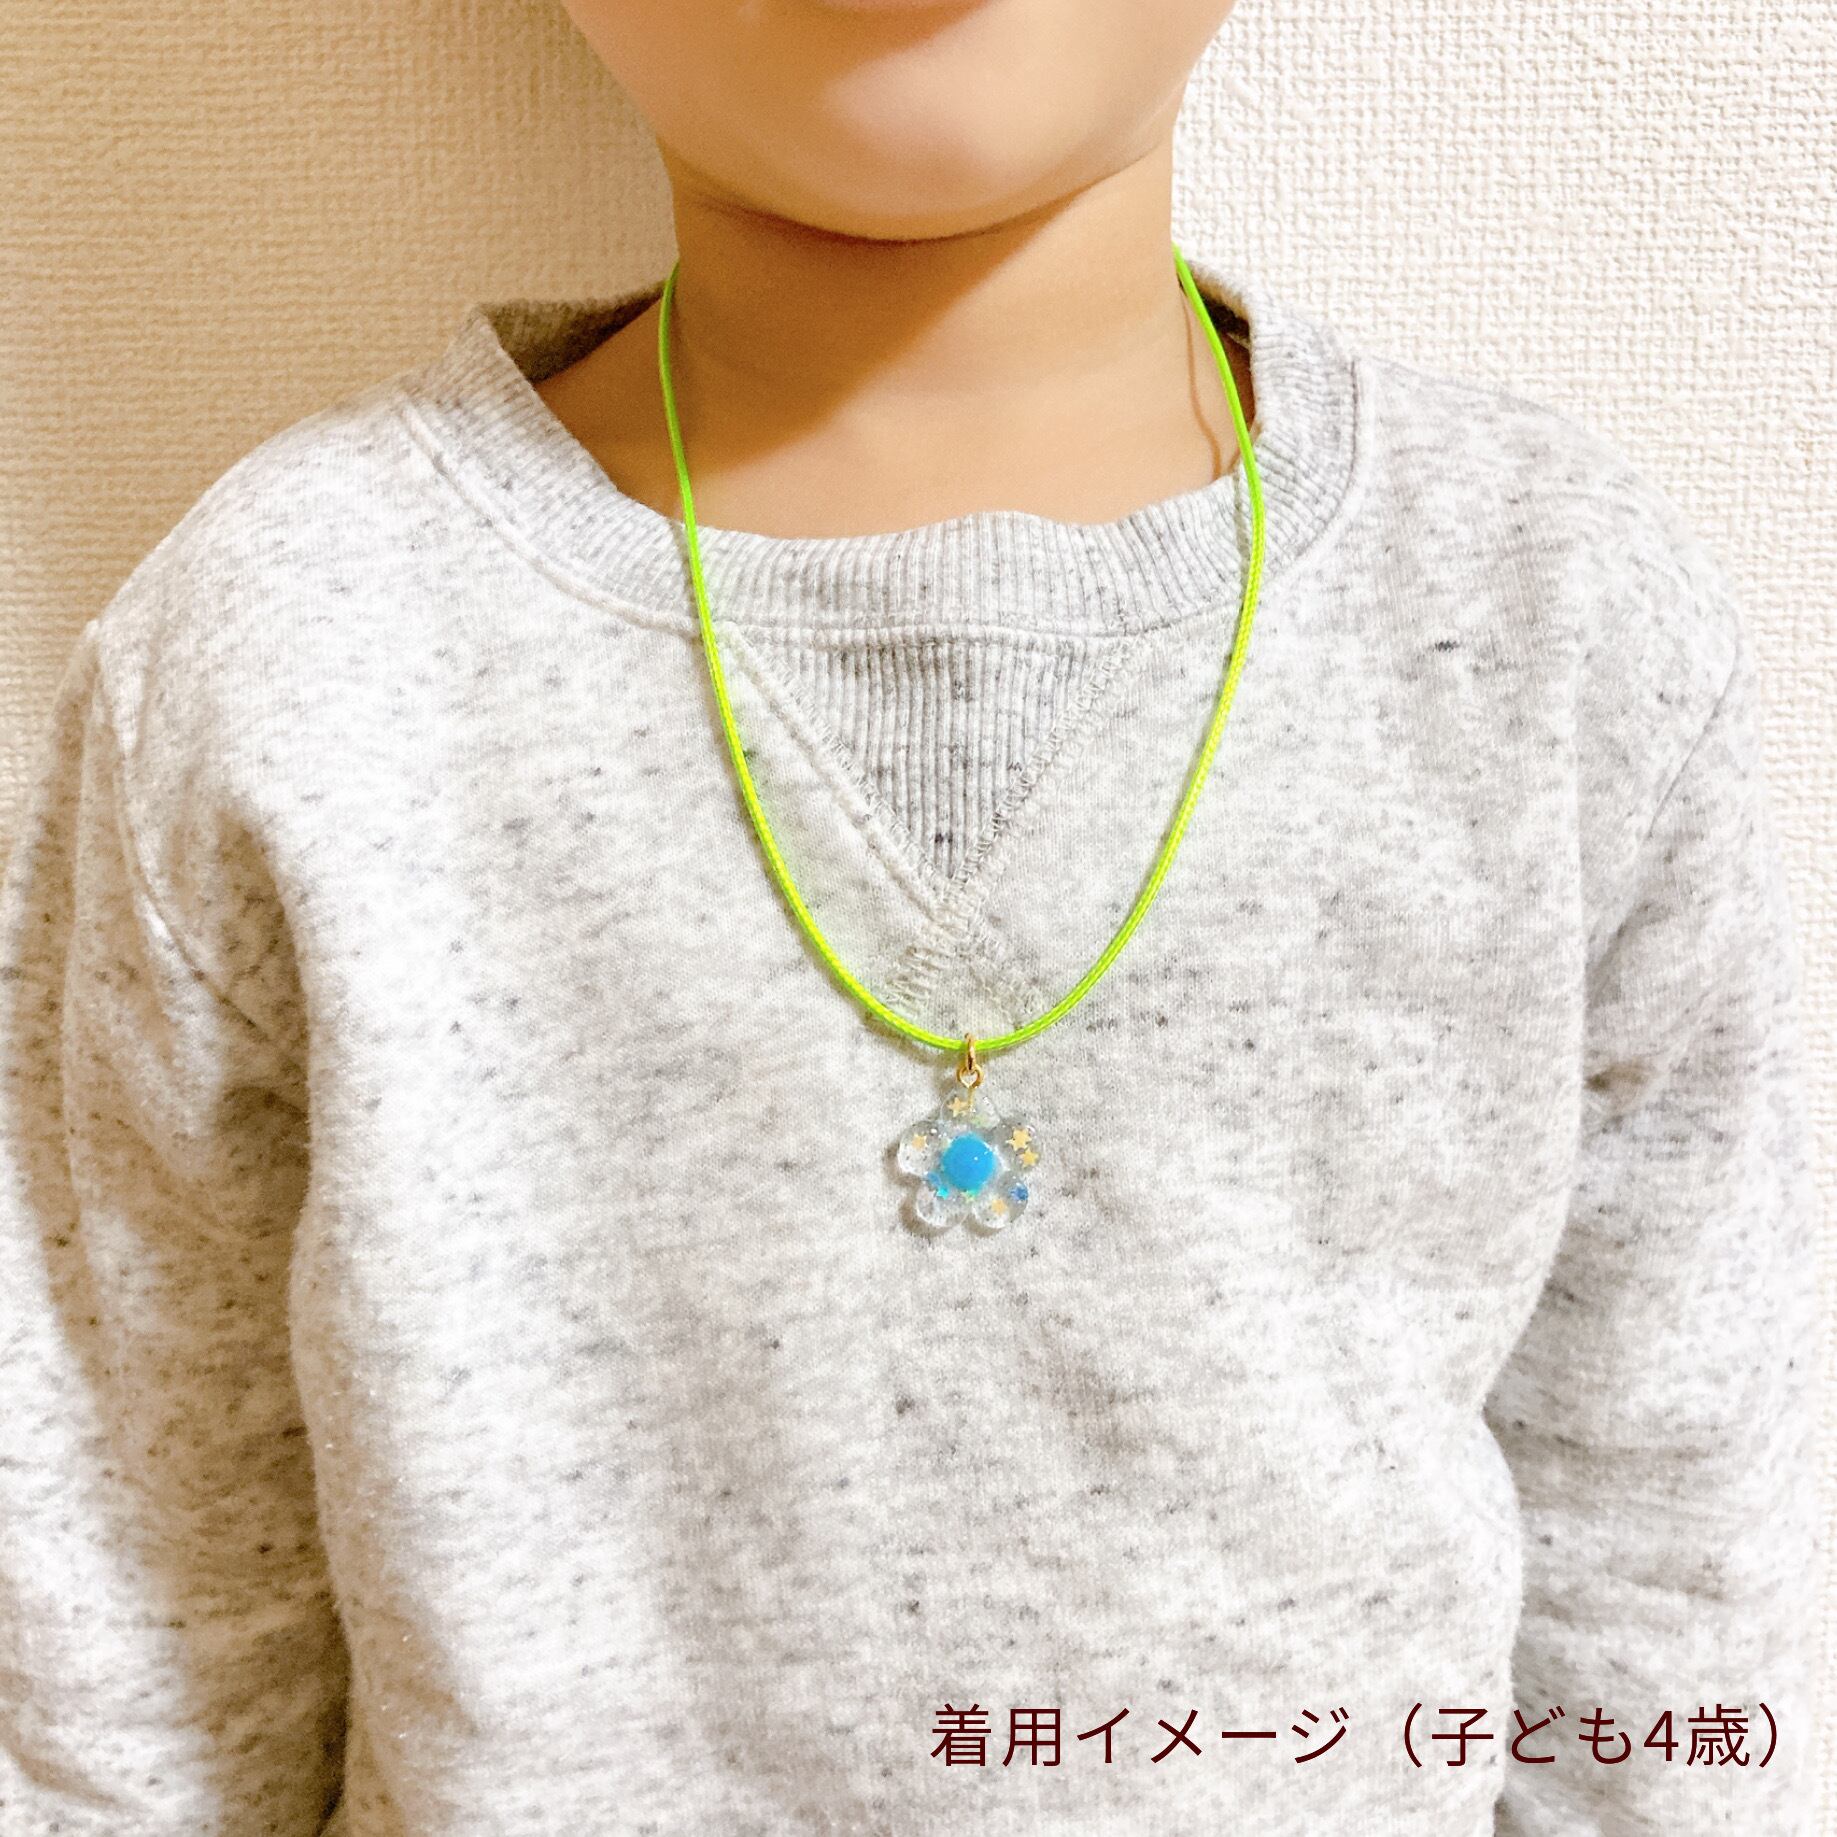 little   necklace  （ c - 1 ）  キッズネックレス